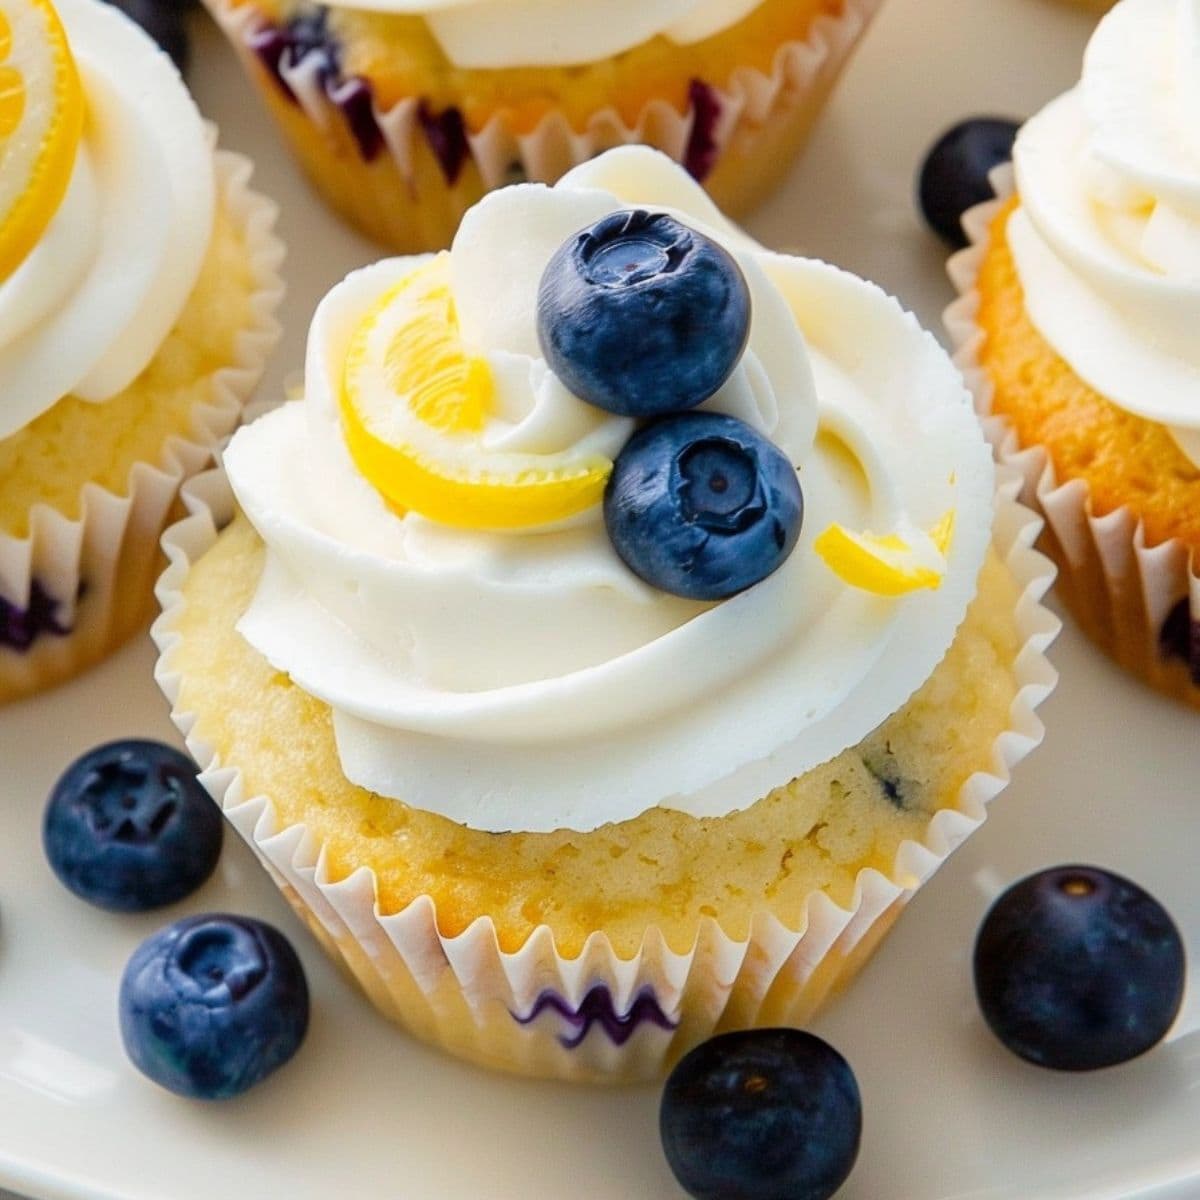 Lemon blueberry cupcakes with blueberries and lemon slice.